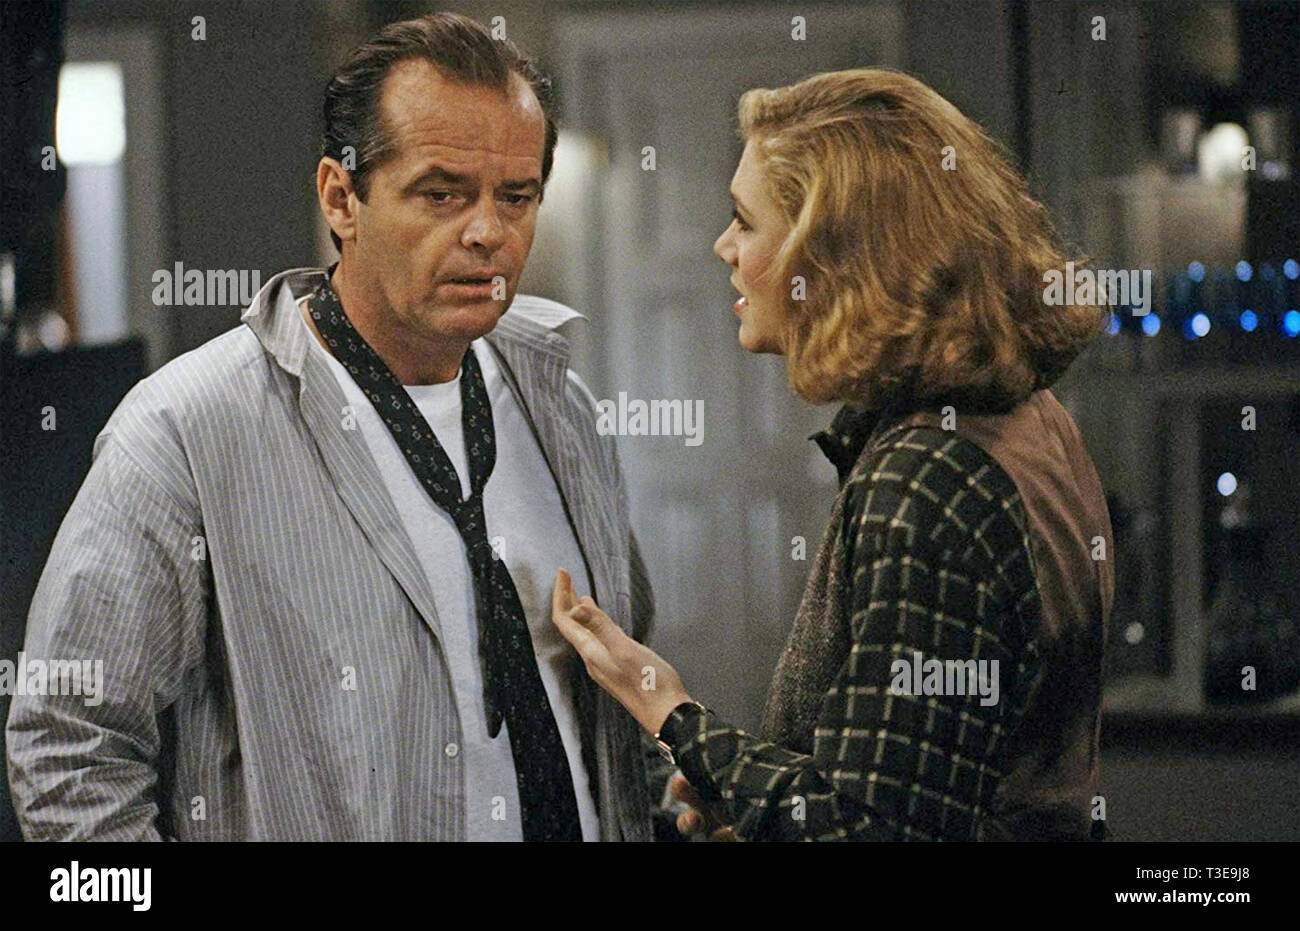 PRIZZI'S ONORE 1985 ABC Motion Pictures film con Kathleen Turner e Jack Nicholson Foto Stock